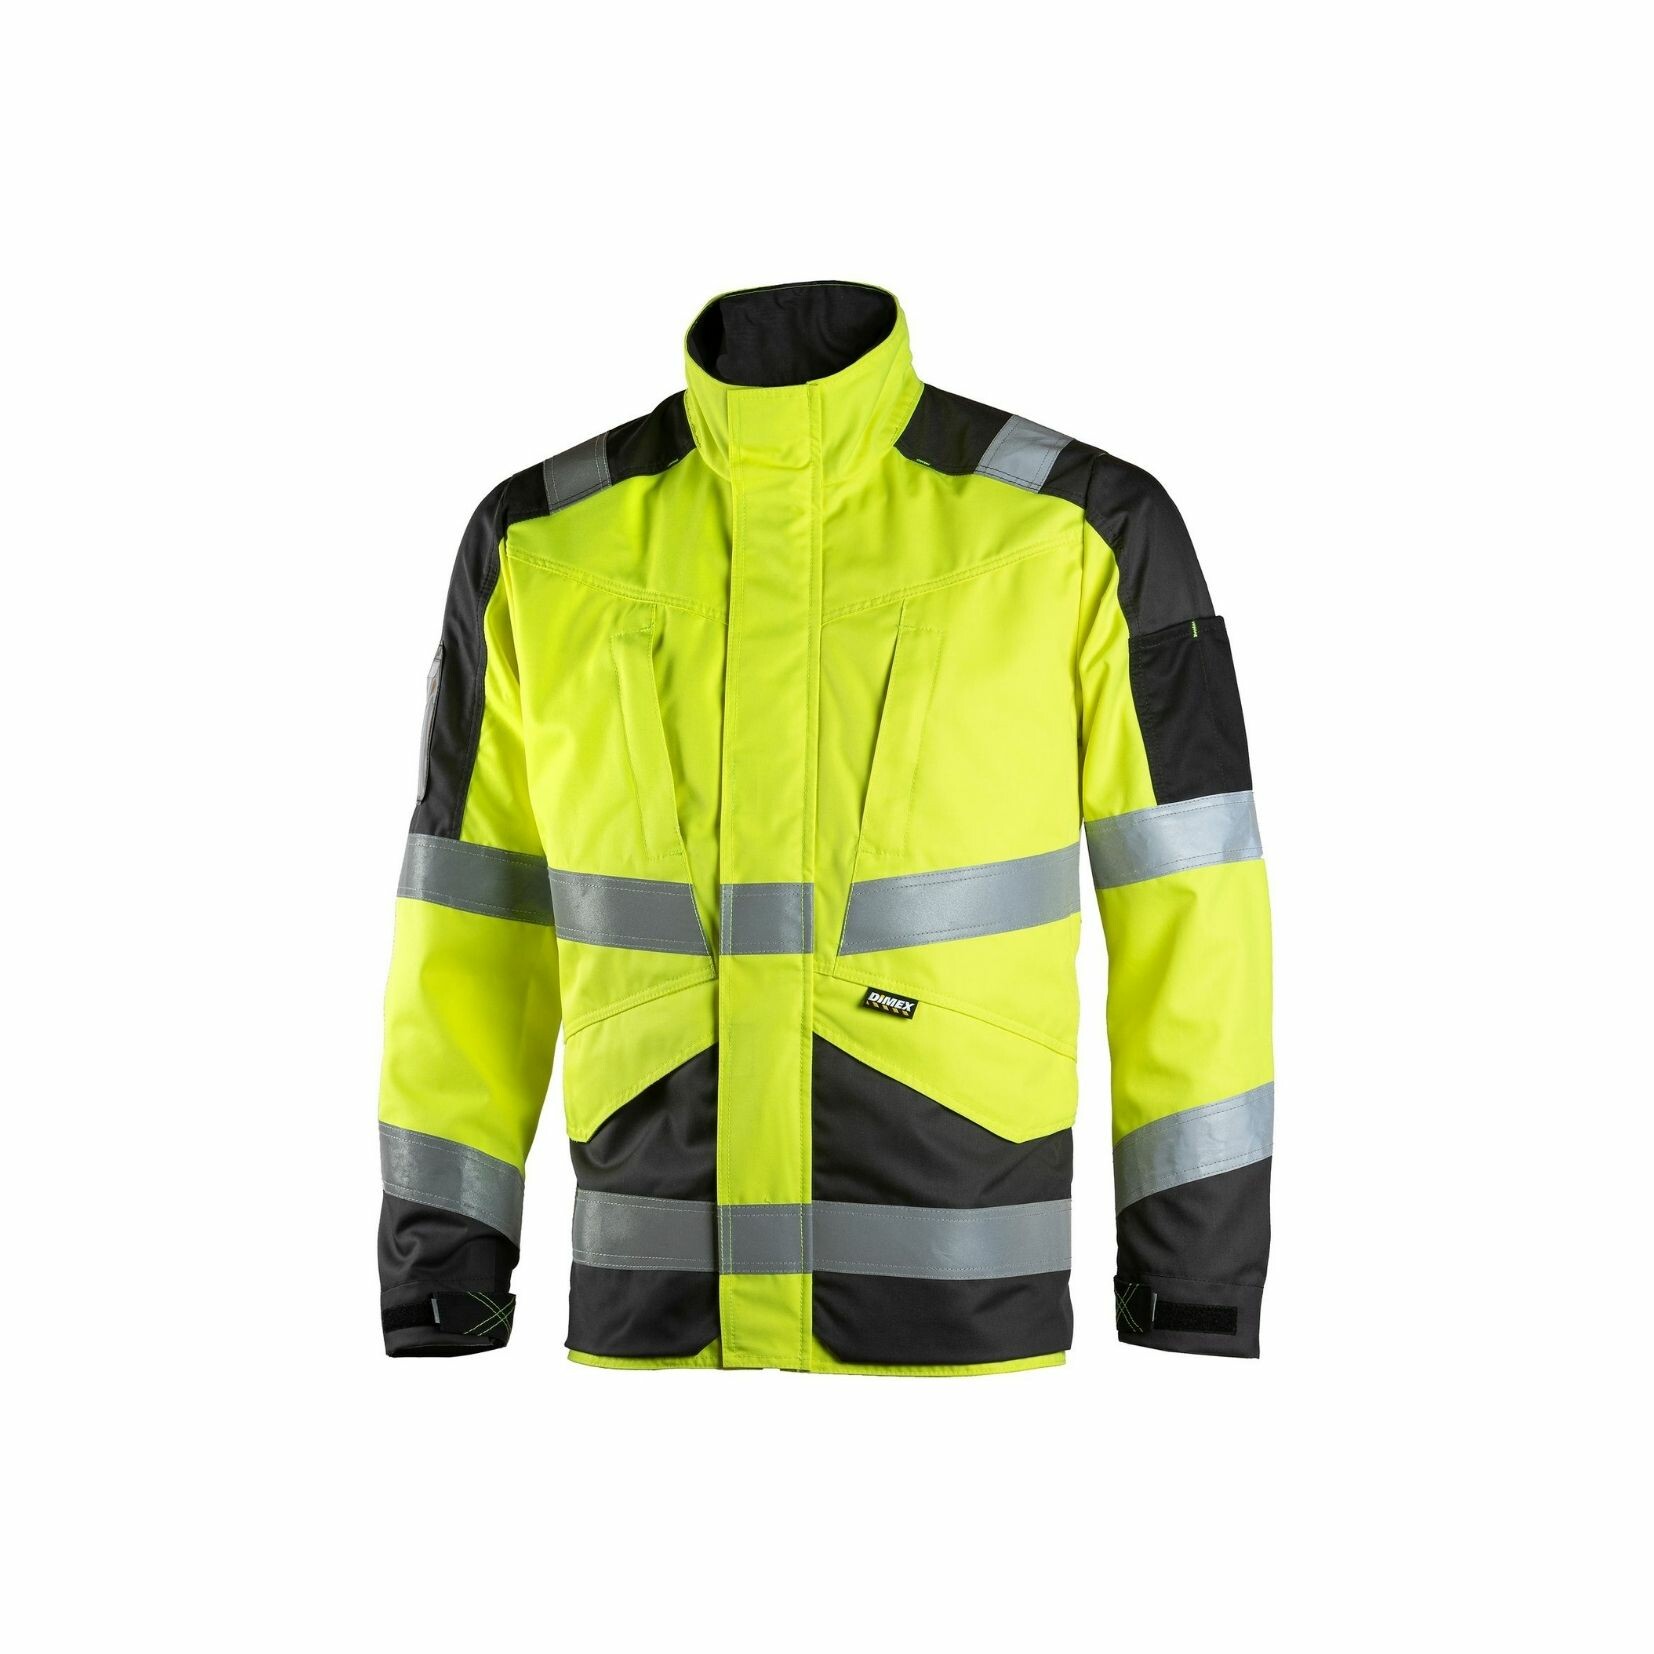 How To Choose the Right Hi-Vis Work Jacket – A Buyer's Guide - Blog